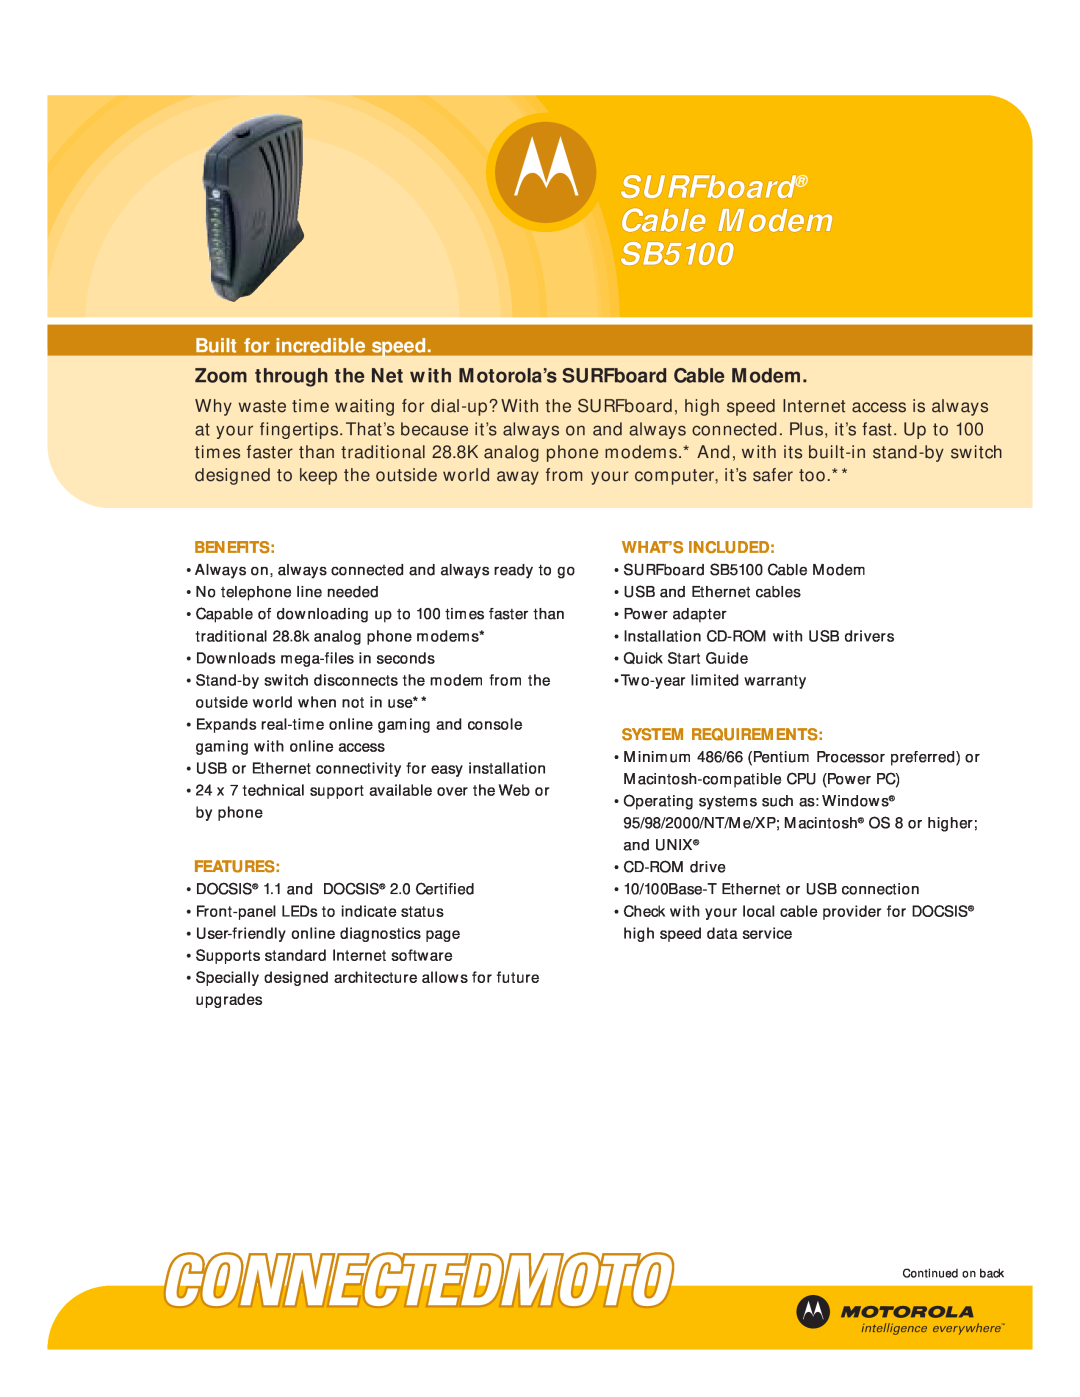 Motorola quick start SURFboard Cable Modem SB5100, Built for incredible speed, Benefits, Features, What’S Included 